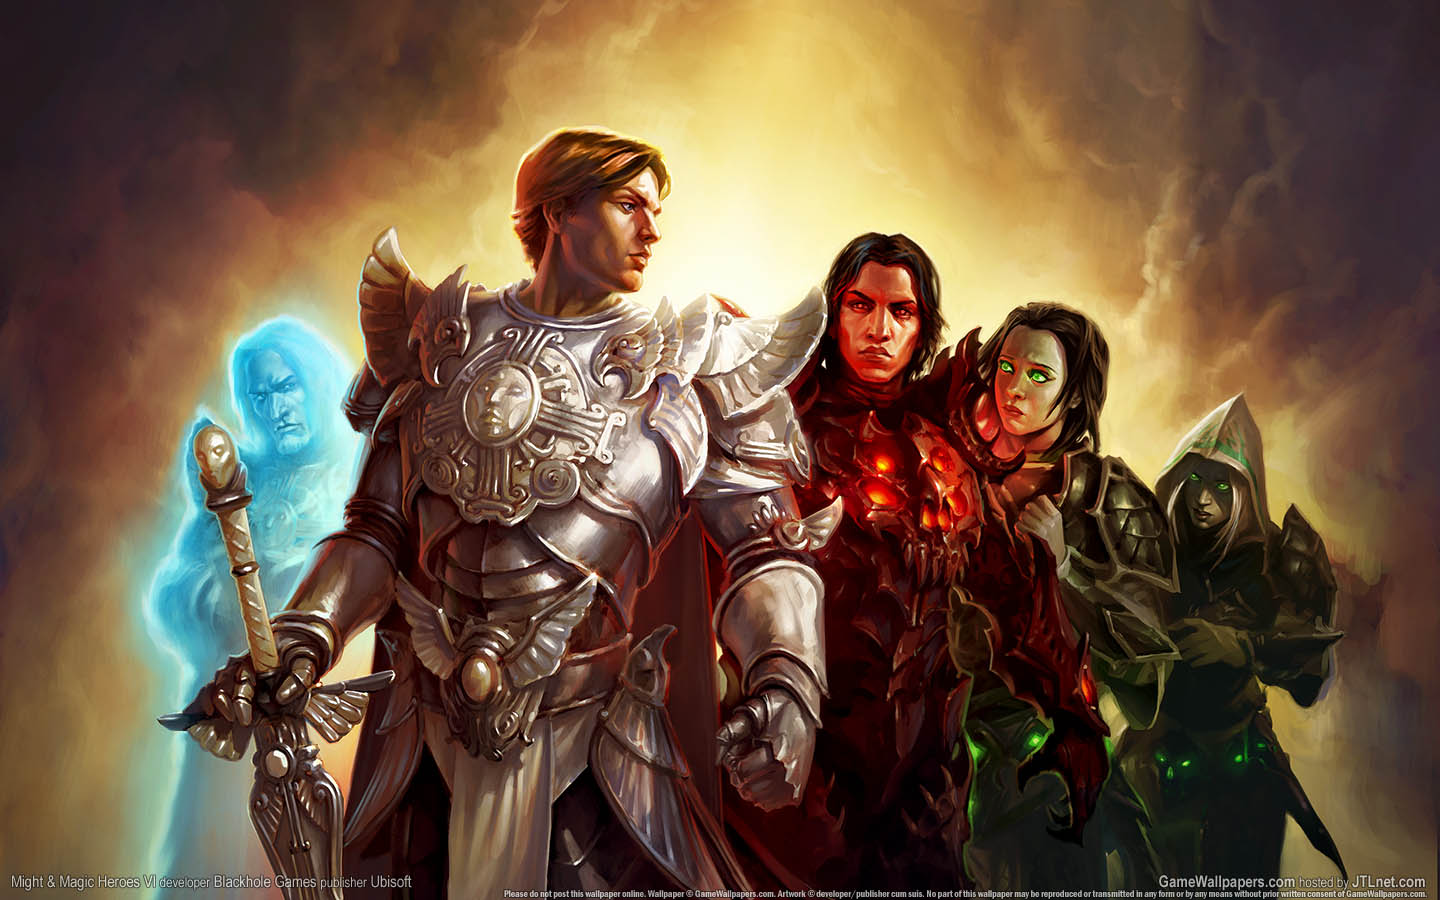 Might & Magic Heroes 6 achtergrond 02 1440x900